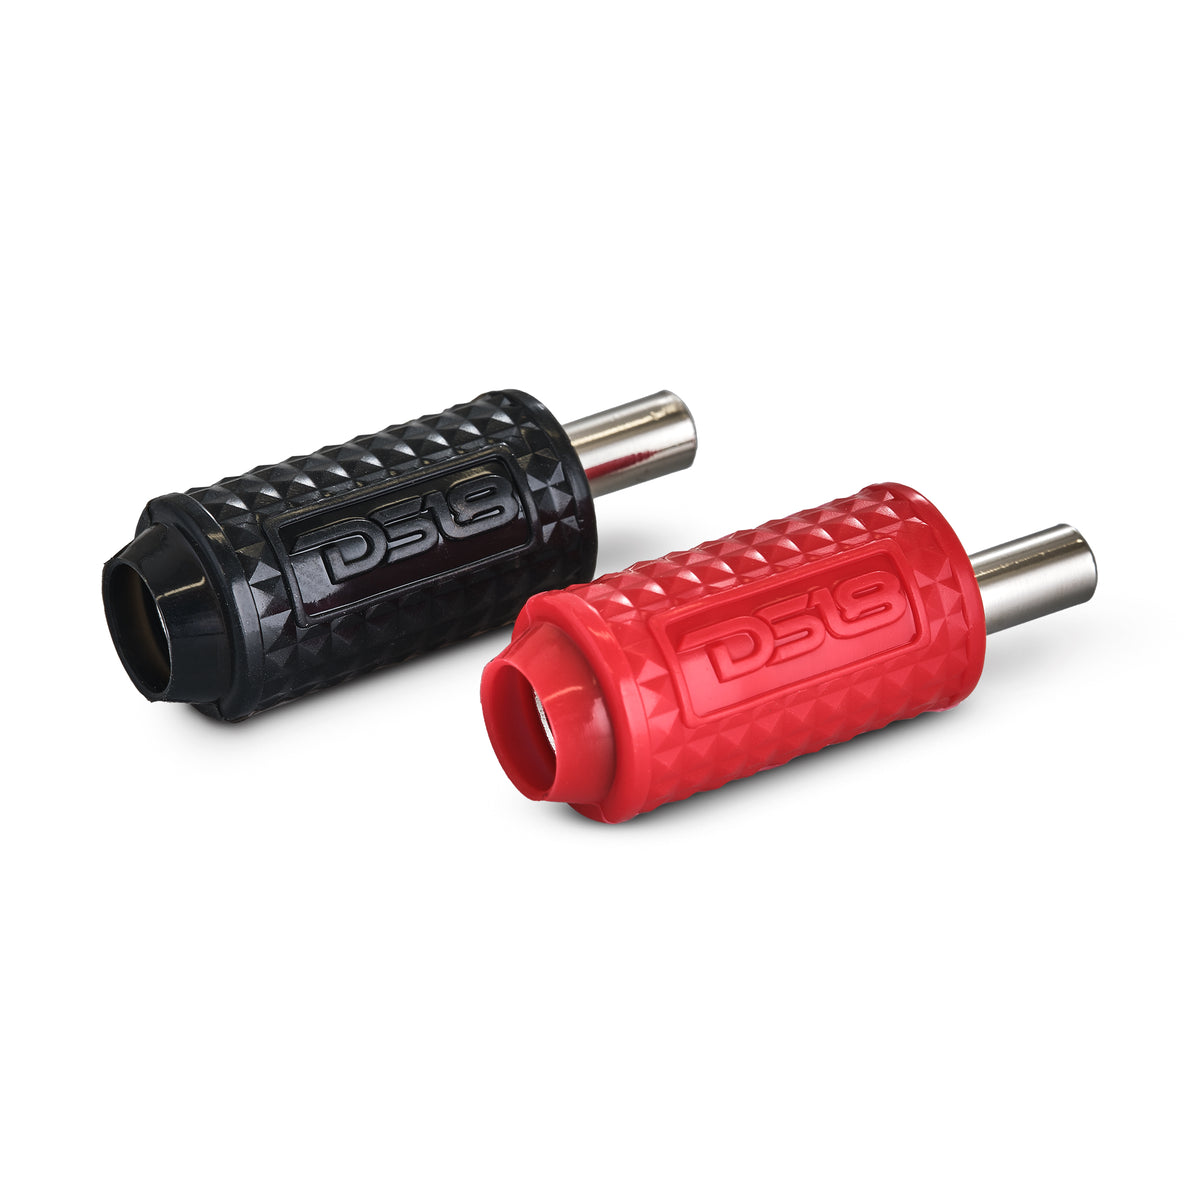 1/0-GA to 1/4-GA Amp Input Reducers with Offset Stub and Silicone Cover